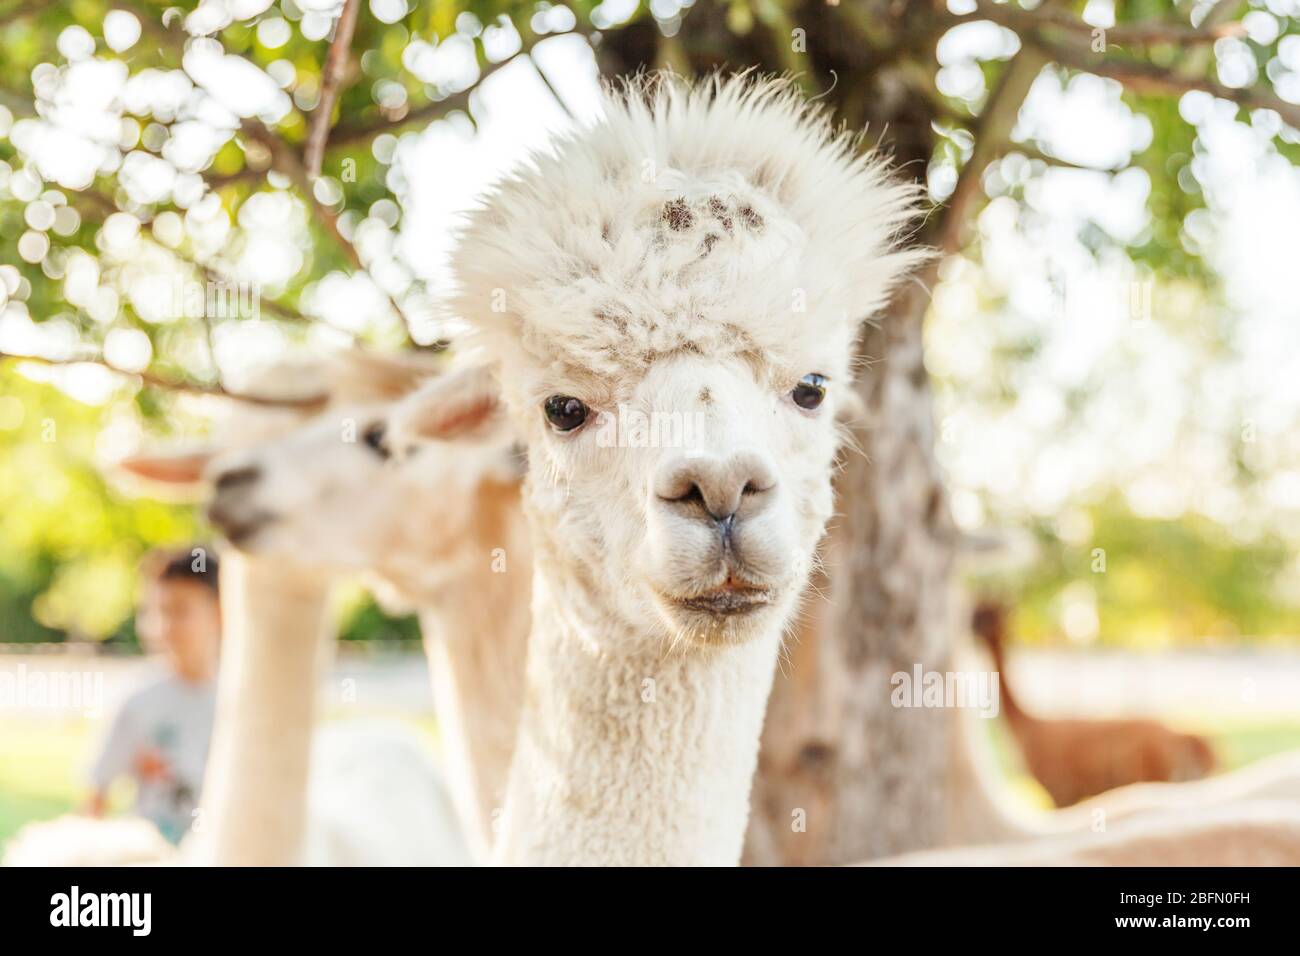 Cute Alpaca With Funny Face Relaxing On Ranch In Summer Day Domestic Alpacas Grazing On Pasture In Natural Eco Farm Countryside Background Animal Care And Ecological Farming Concept Stock Photo Alamy